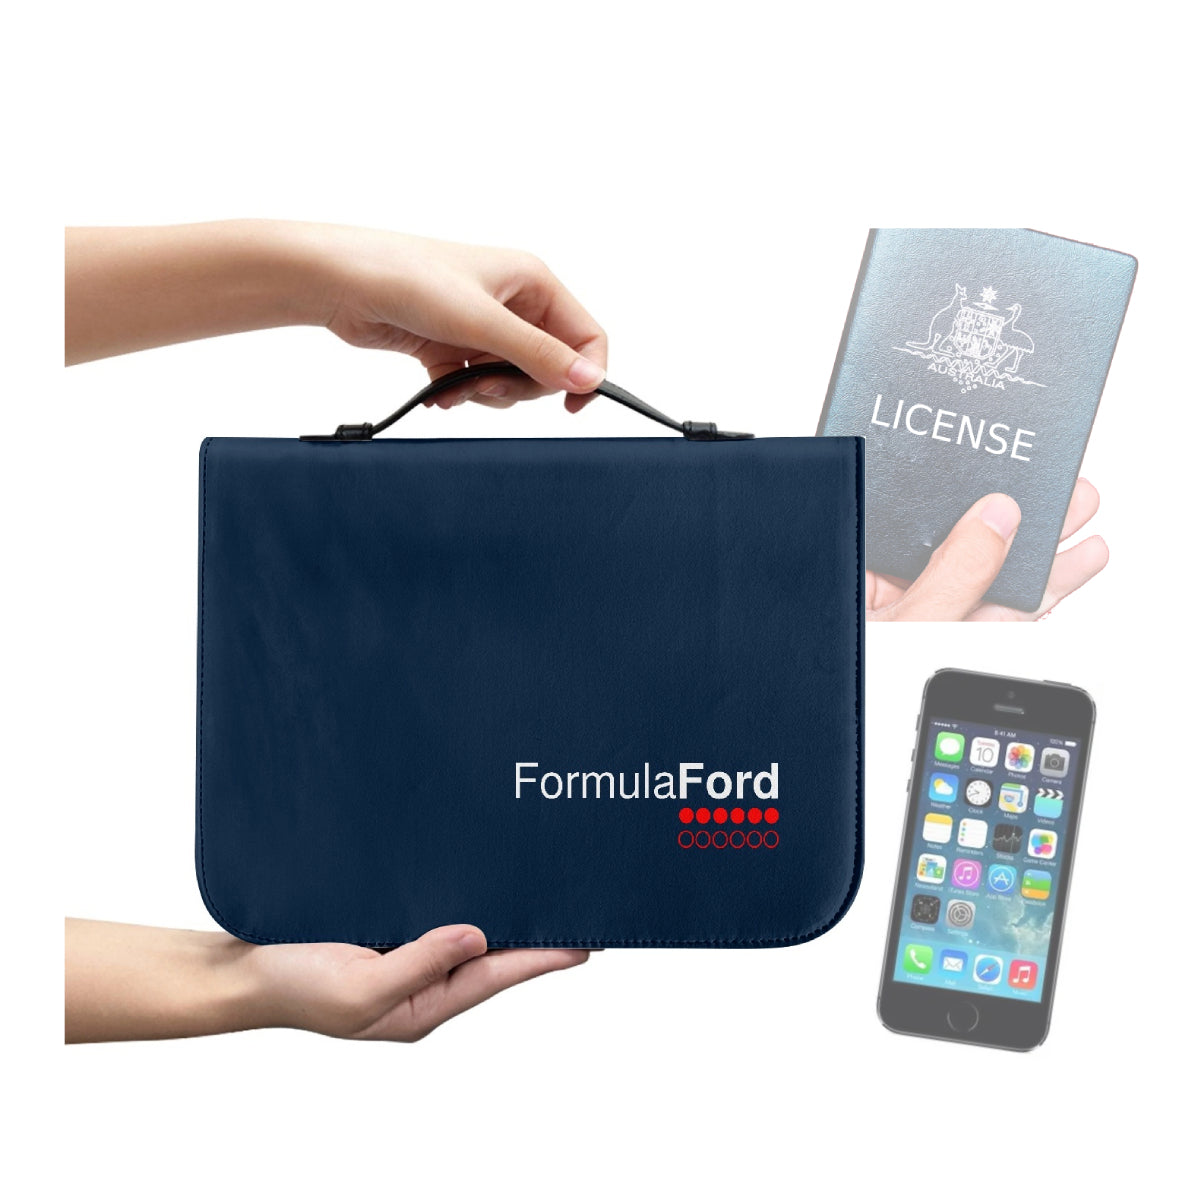 FORMULA FORD Official Leather - Licence, Phone and Documents Holder - Navy - 4 SIZES